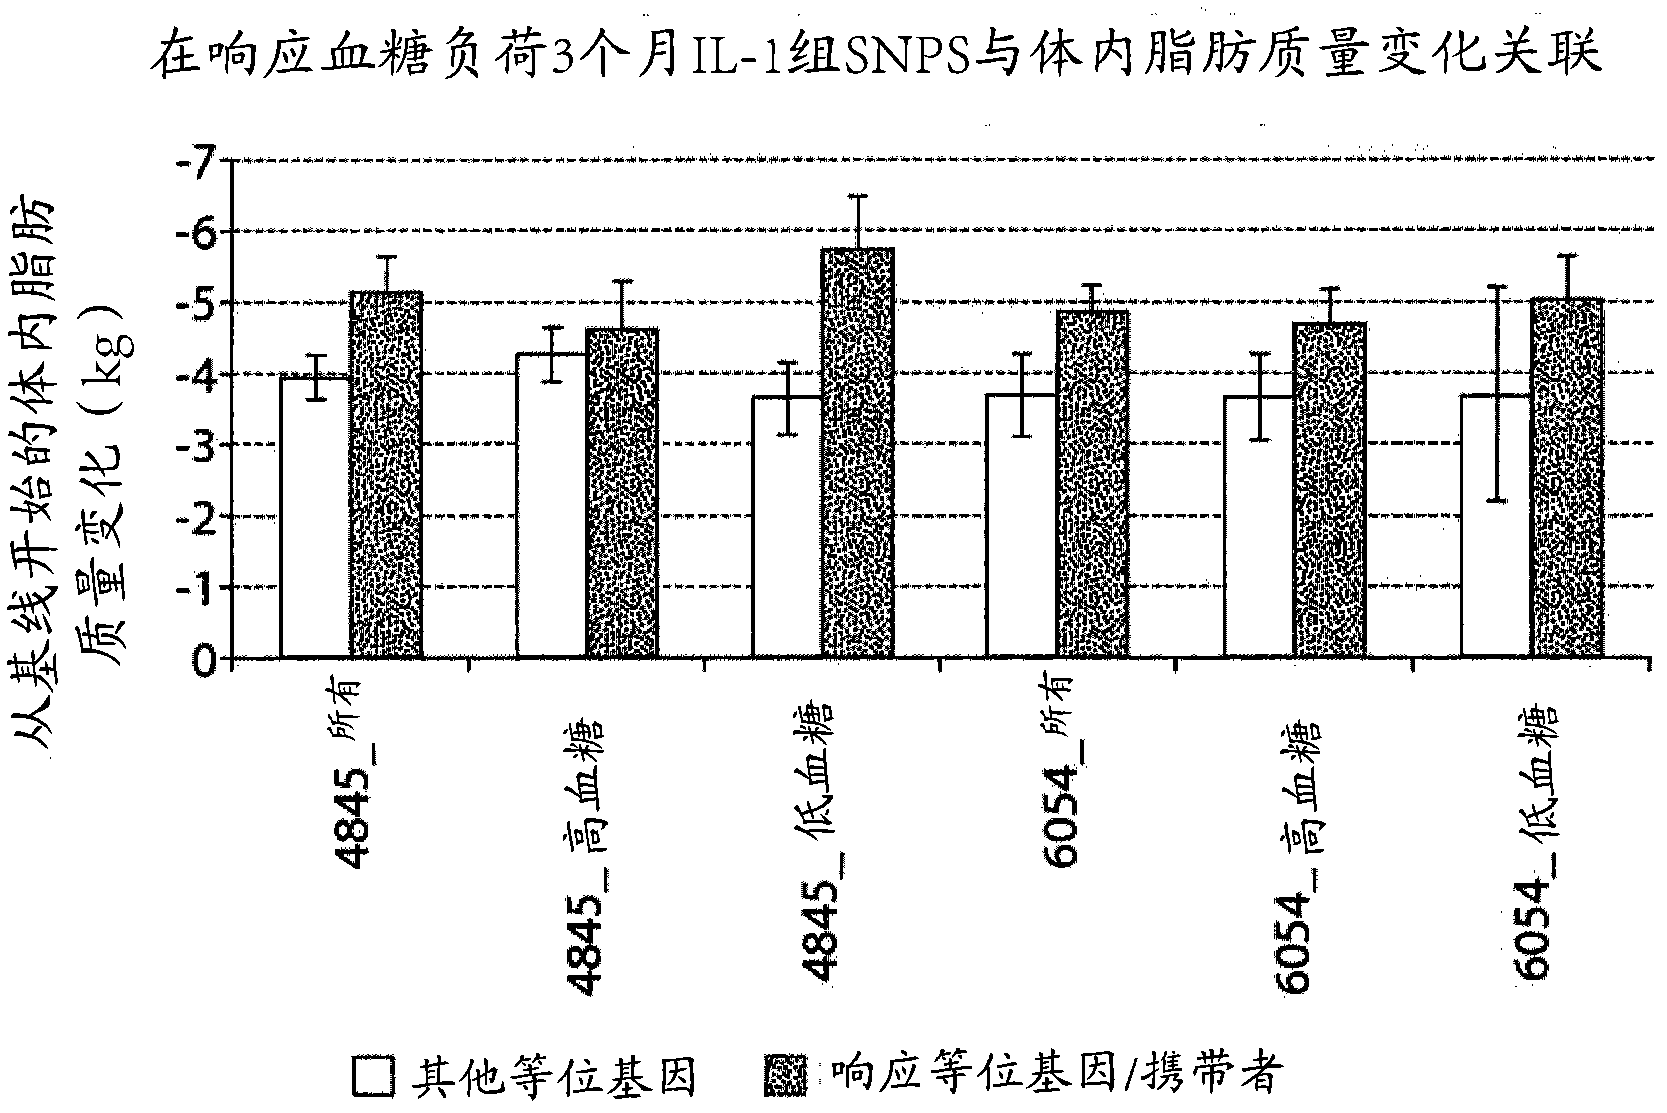 Genetic markers for weight management and methods of use thereof